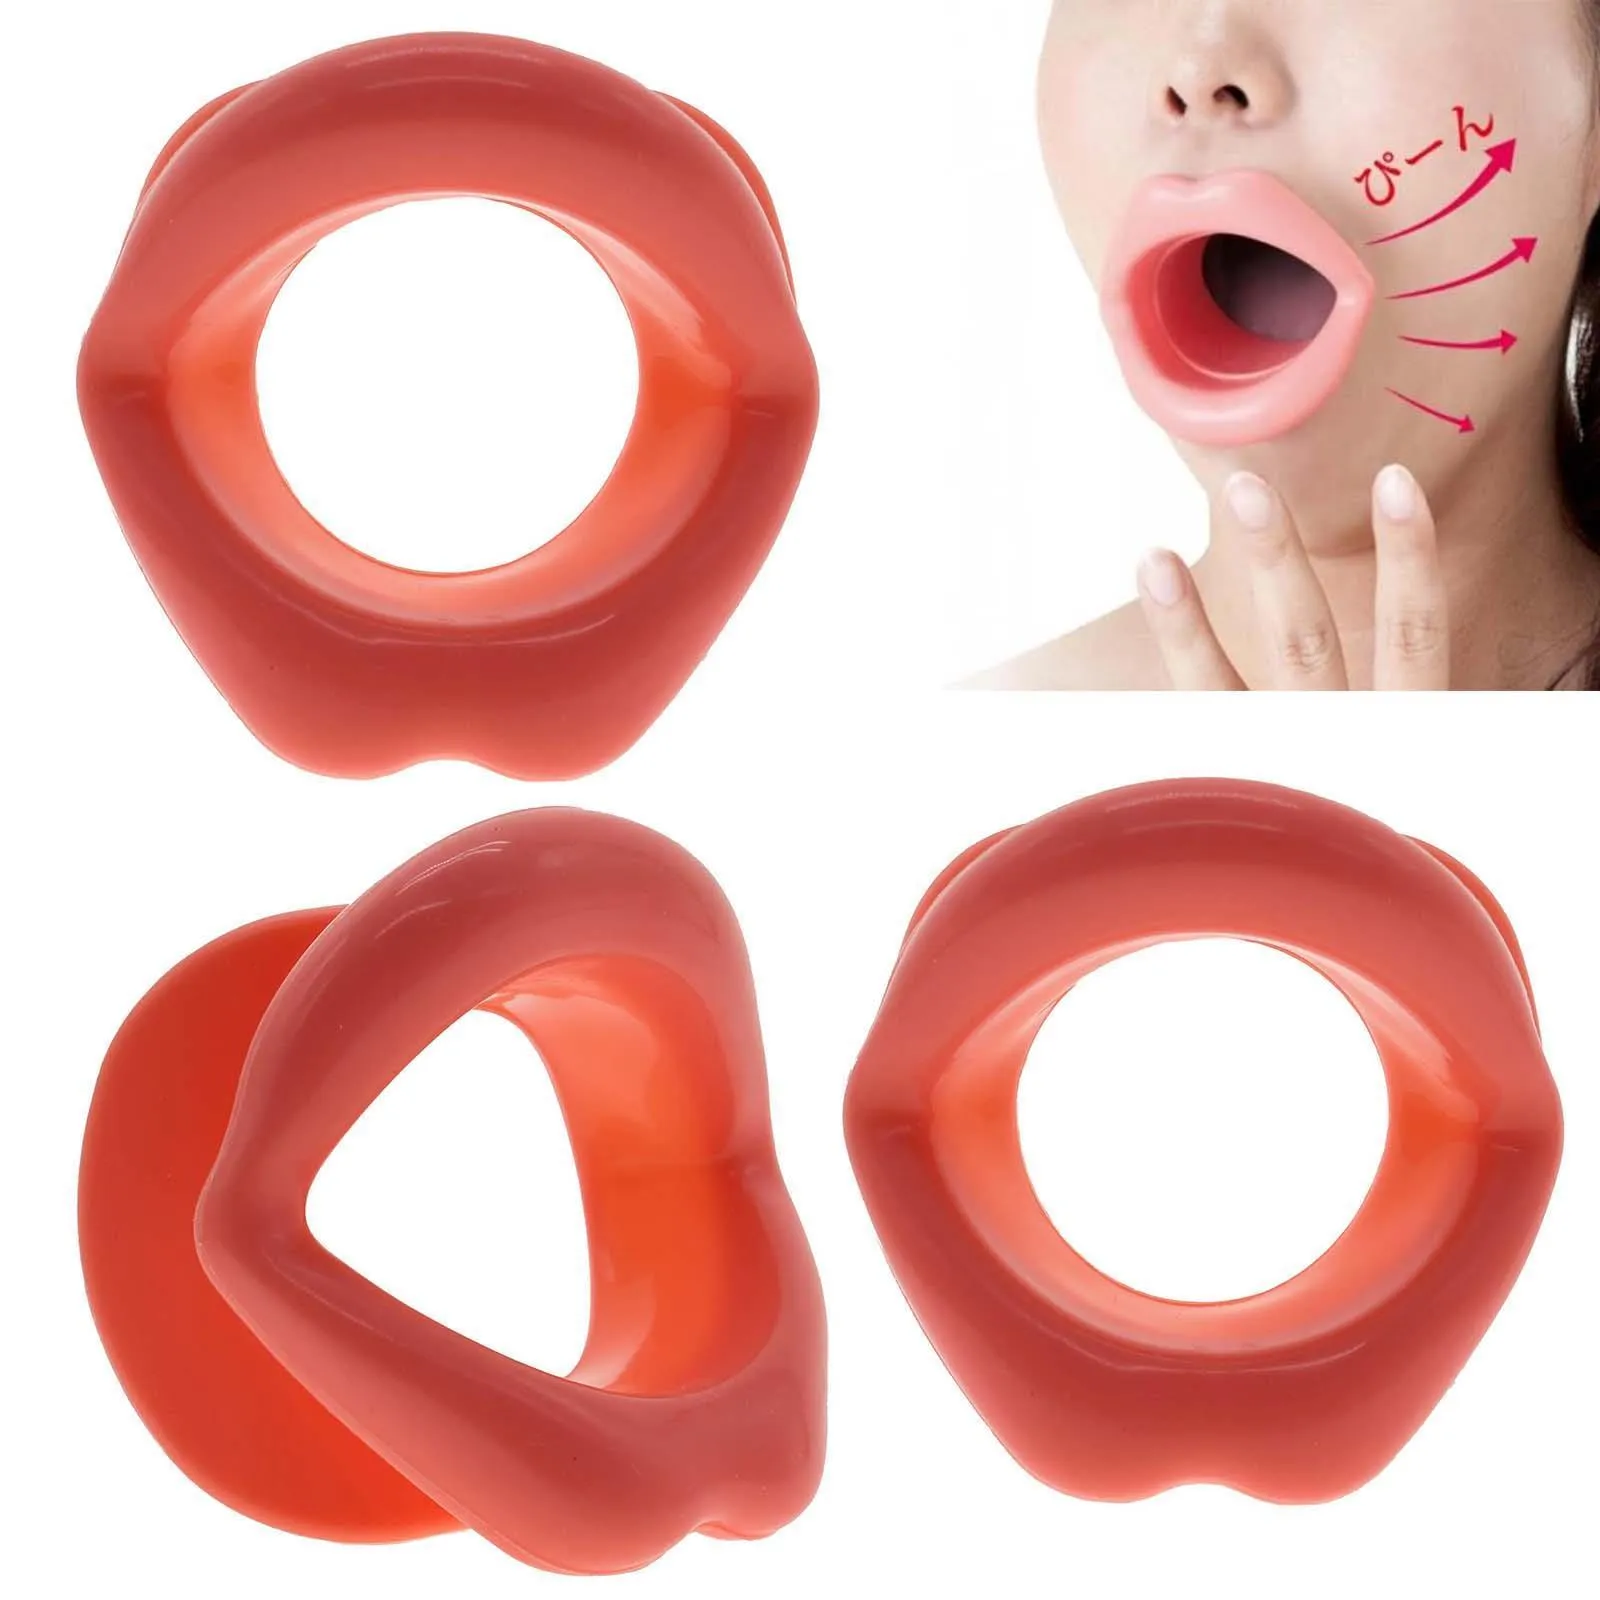 Women's Anti-Aging Wrinkle Mouth Face Tightener Slimming Slimmer Shaper Tool #R91